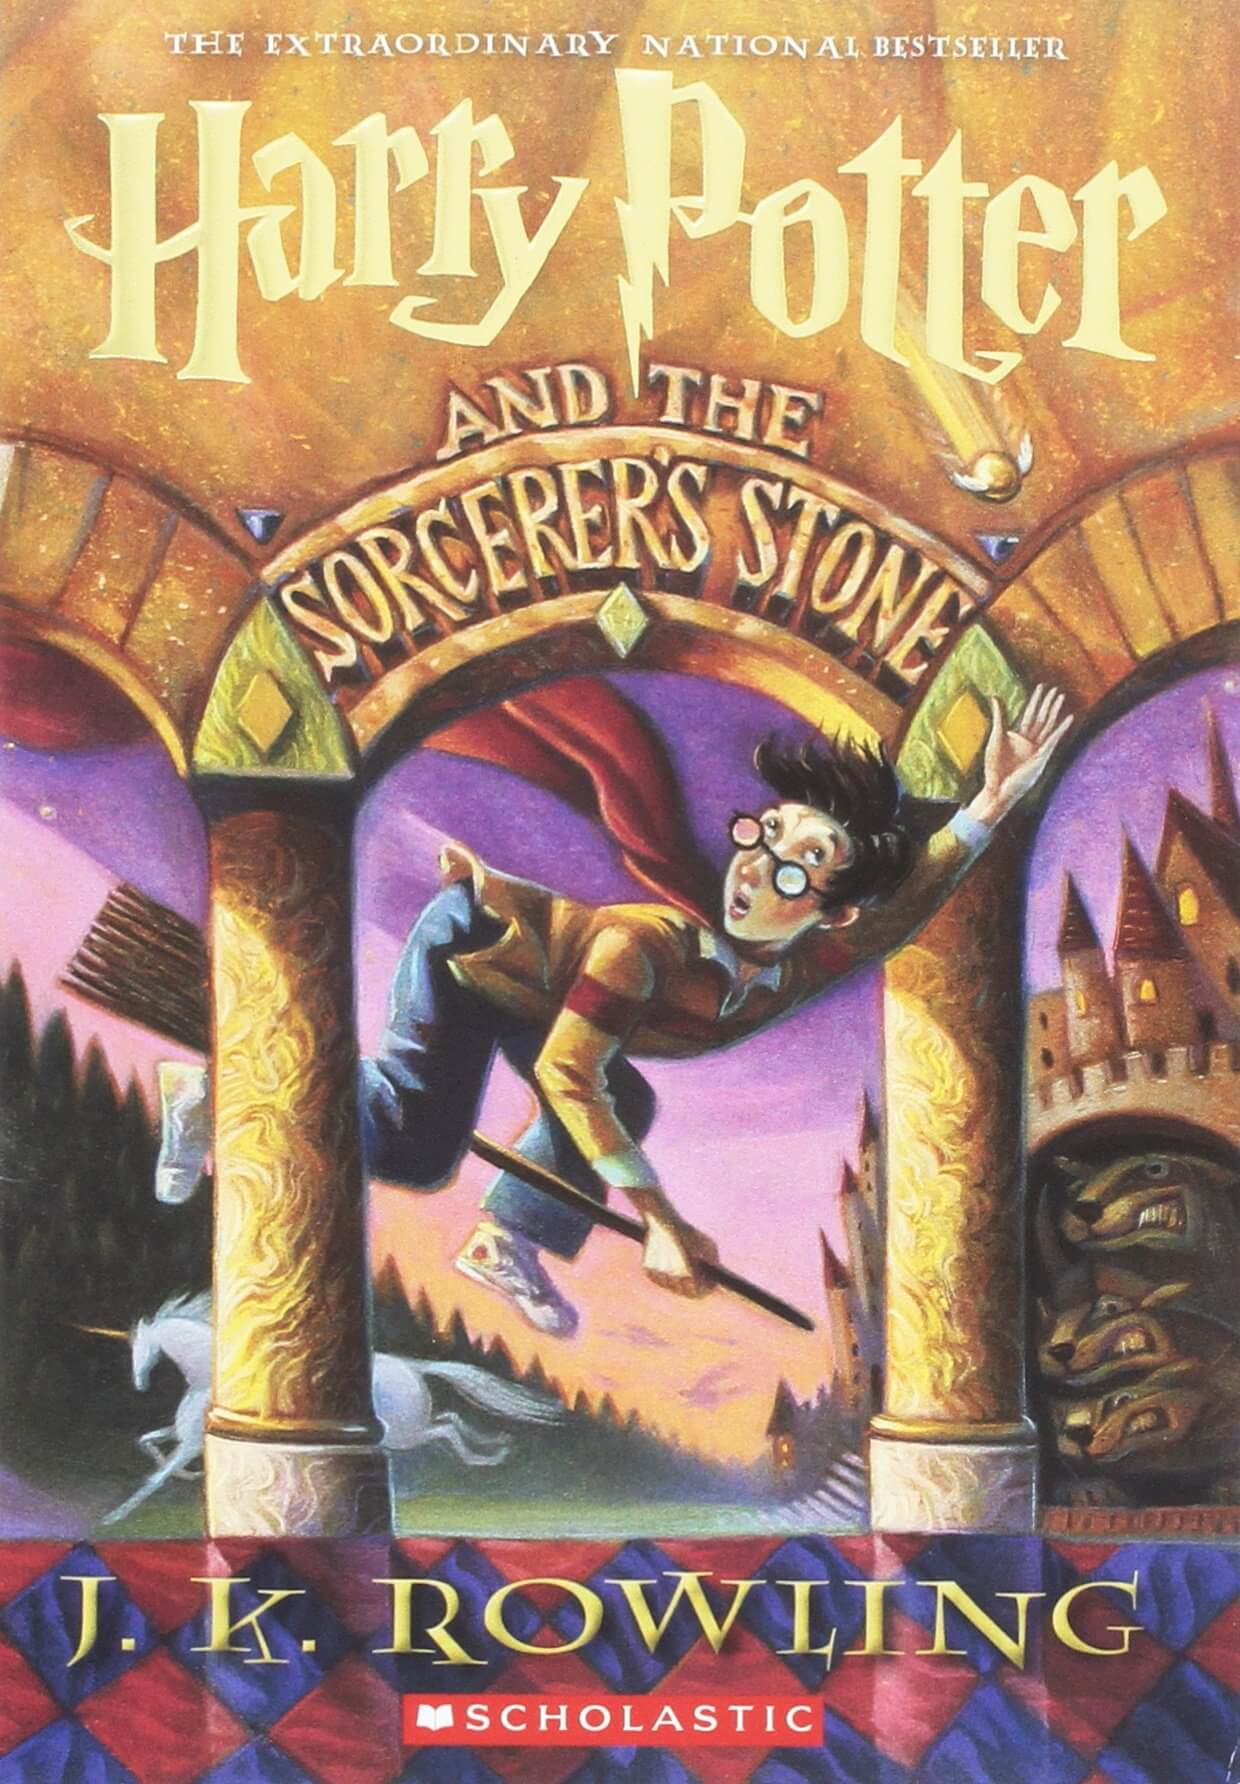 "Harry Potter and the Sorcerer’s Stone"